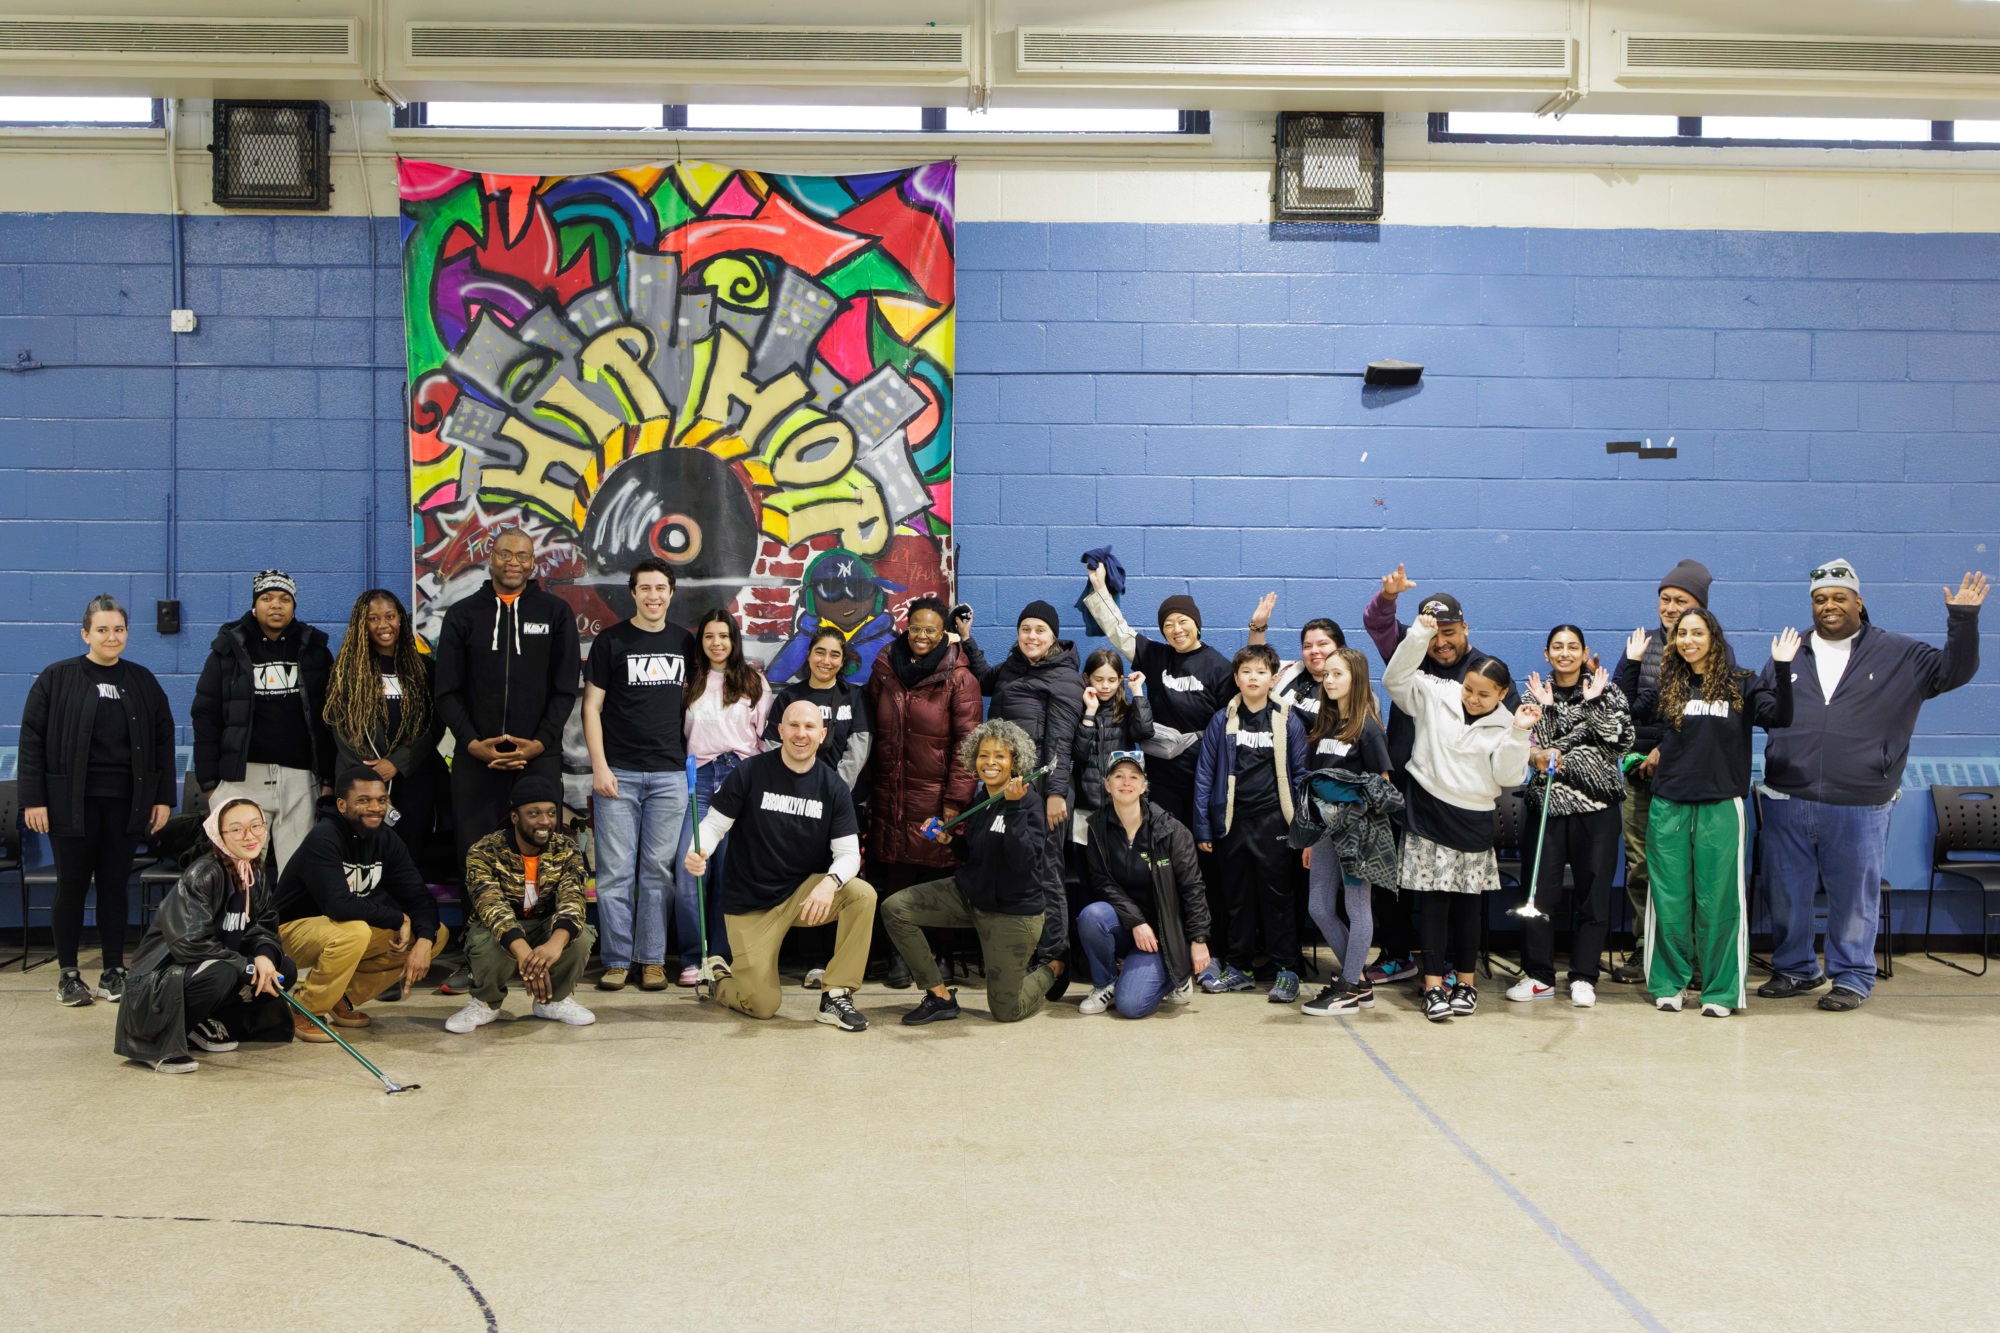 Group of diverse people posing happily in front of a colorful graffiti-style backdrop in a community center.